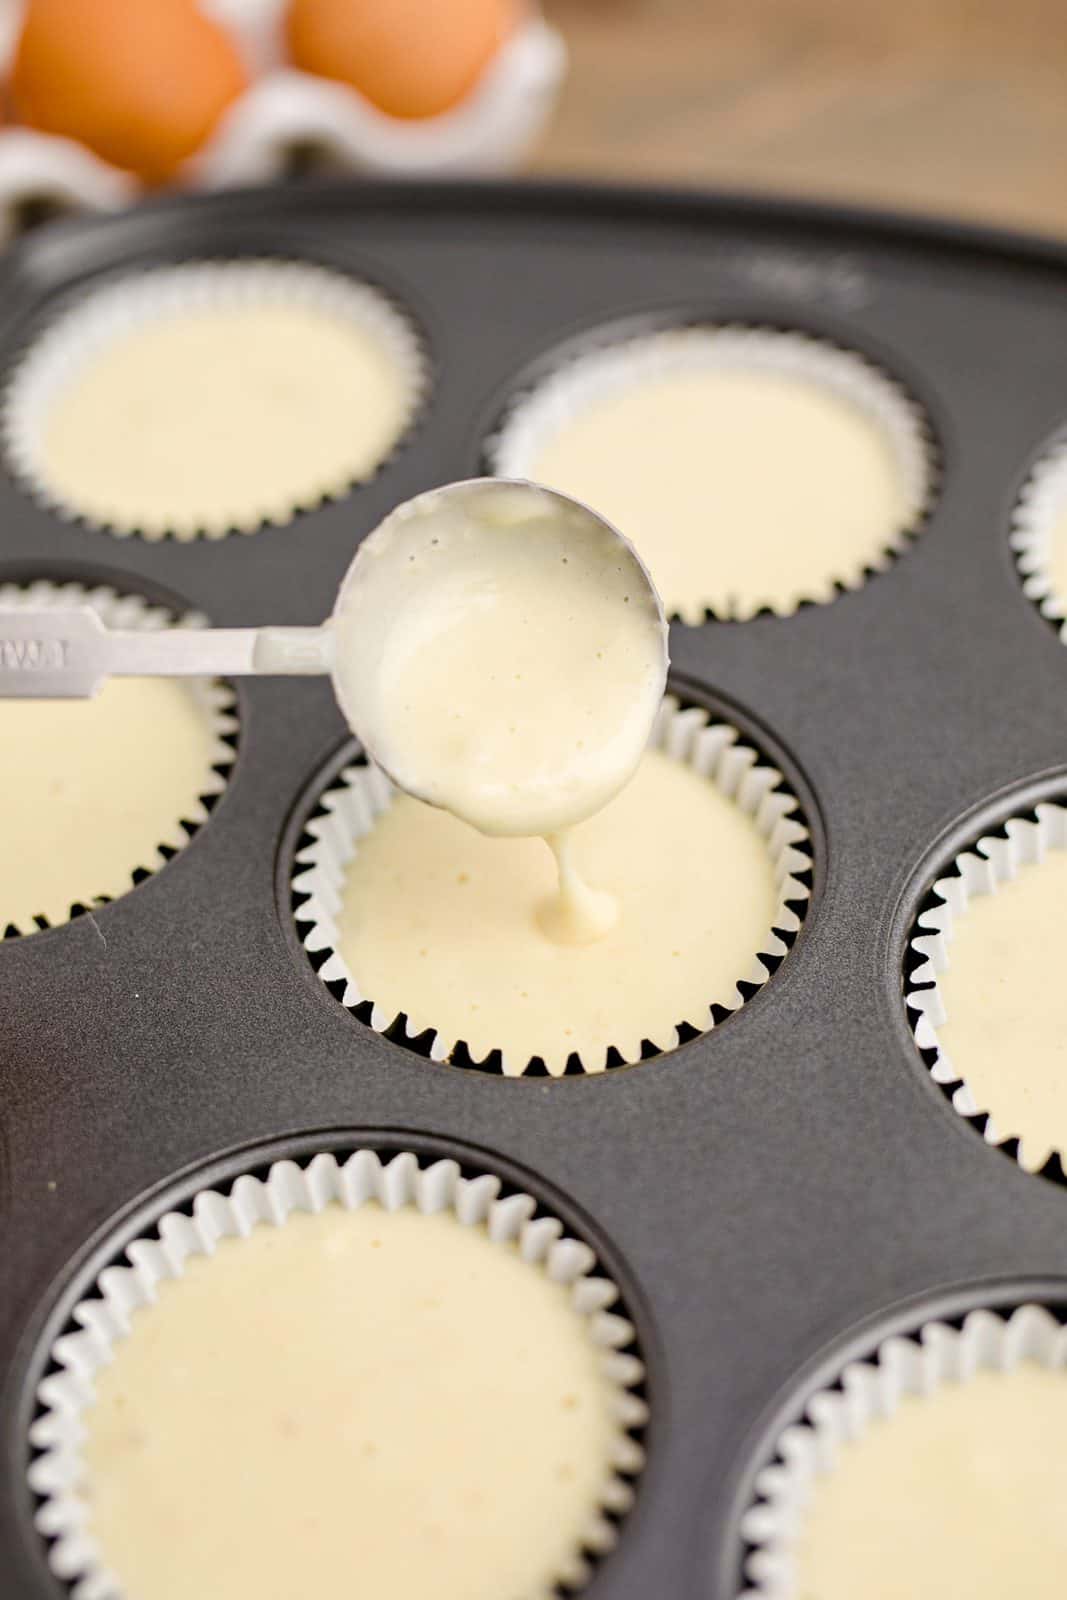 Cheesecake filling being spooned into paper liners in muffin tin.